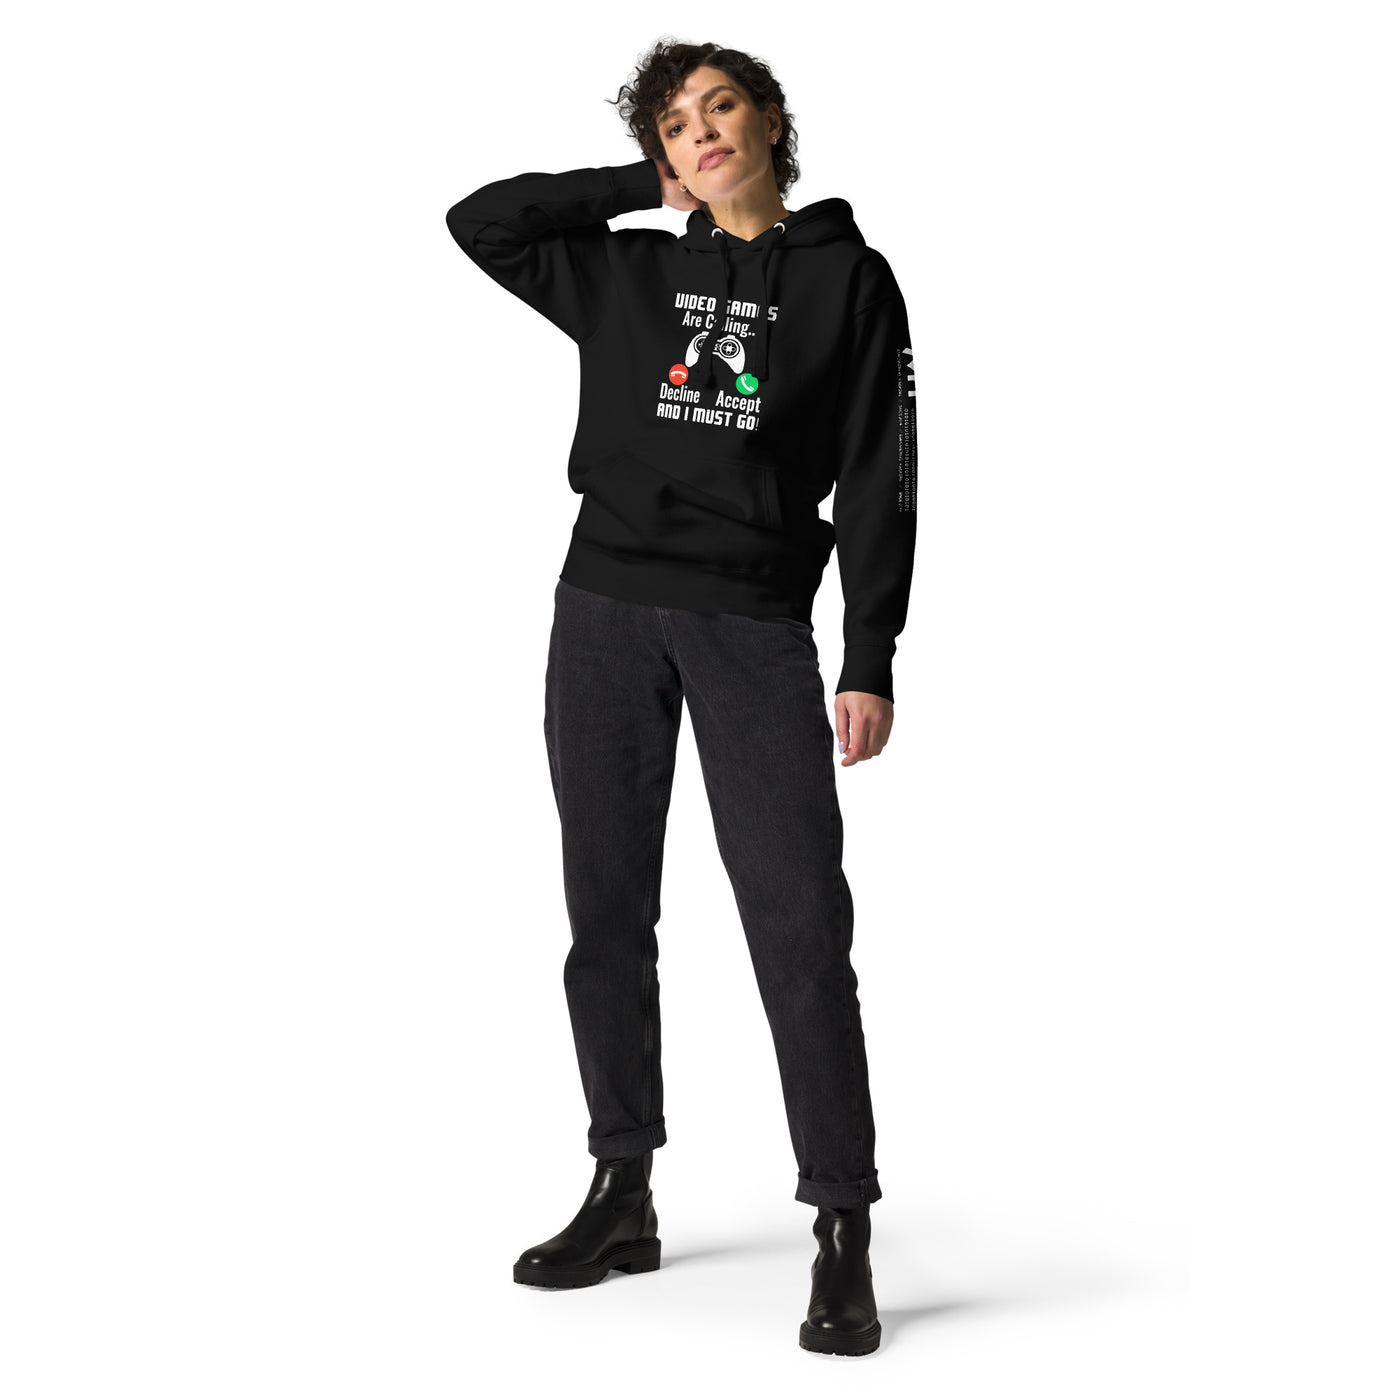 Video Games are Calling and I must Go Rima 18 - Unisex Hoodie